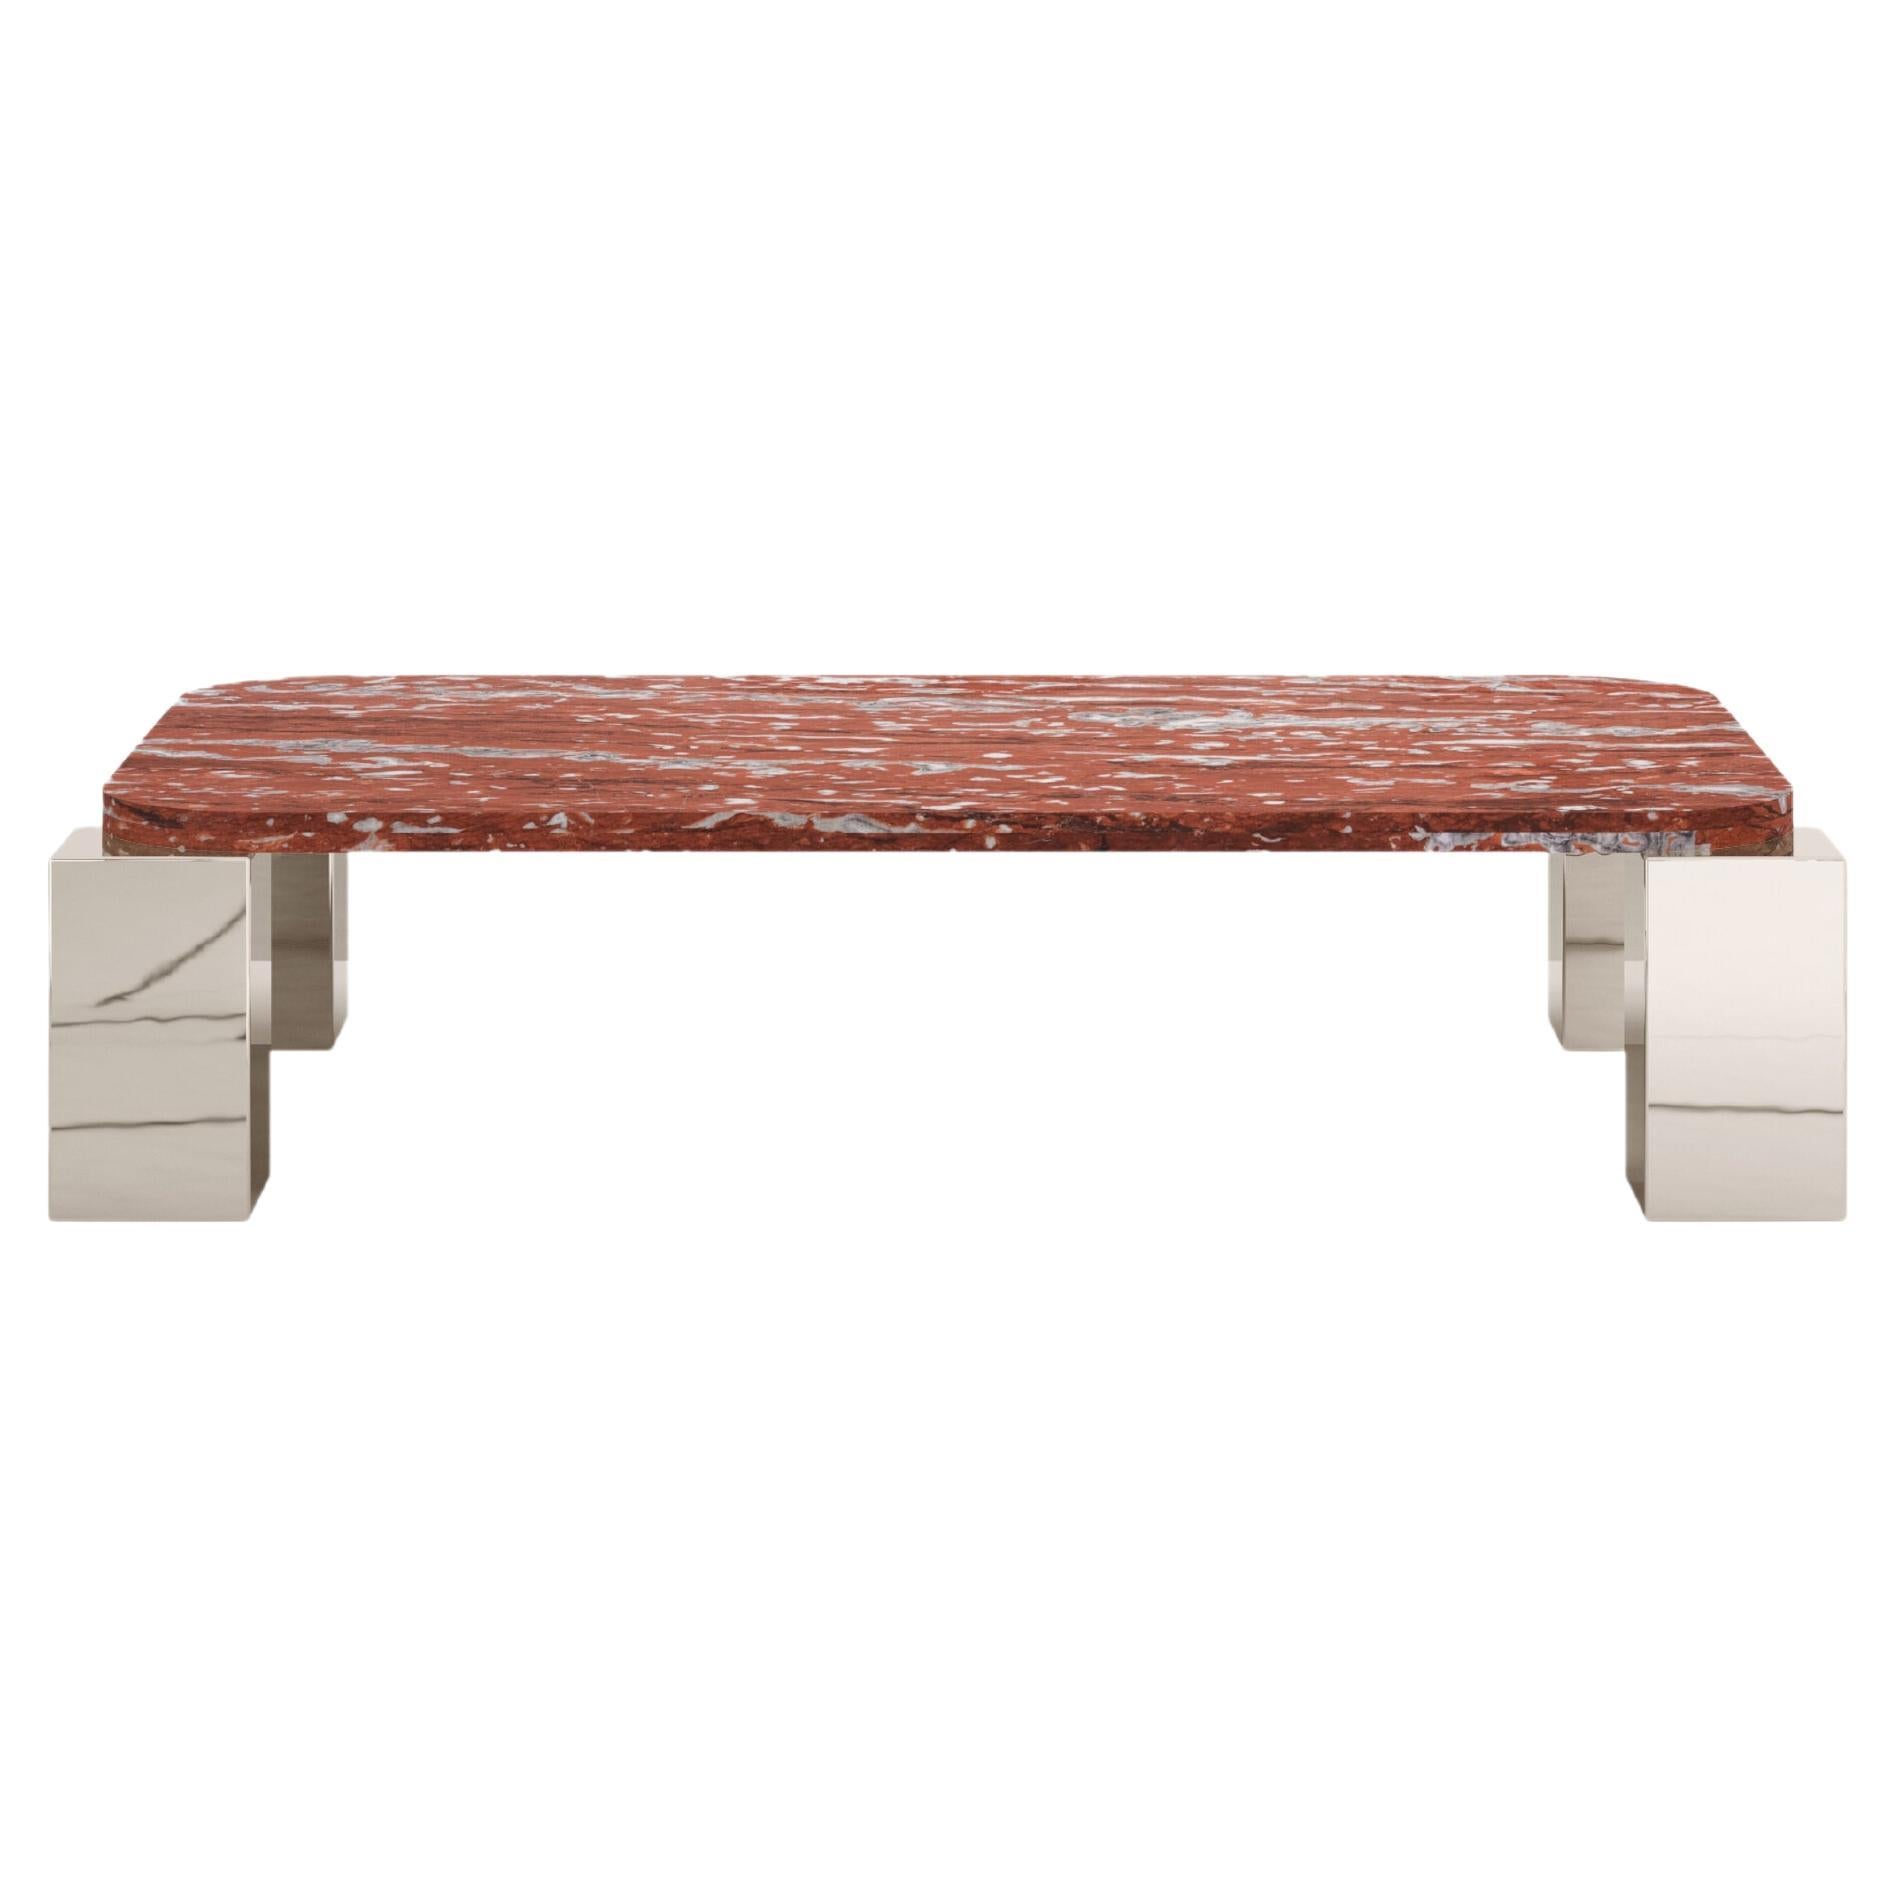 FORM(LA) Cubo Rectangle Coffee Table 62”L x 38”W x 14”H Francia Marble & Chrome For Sale